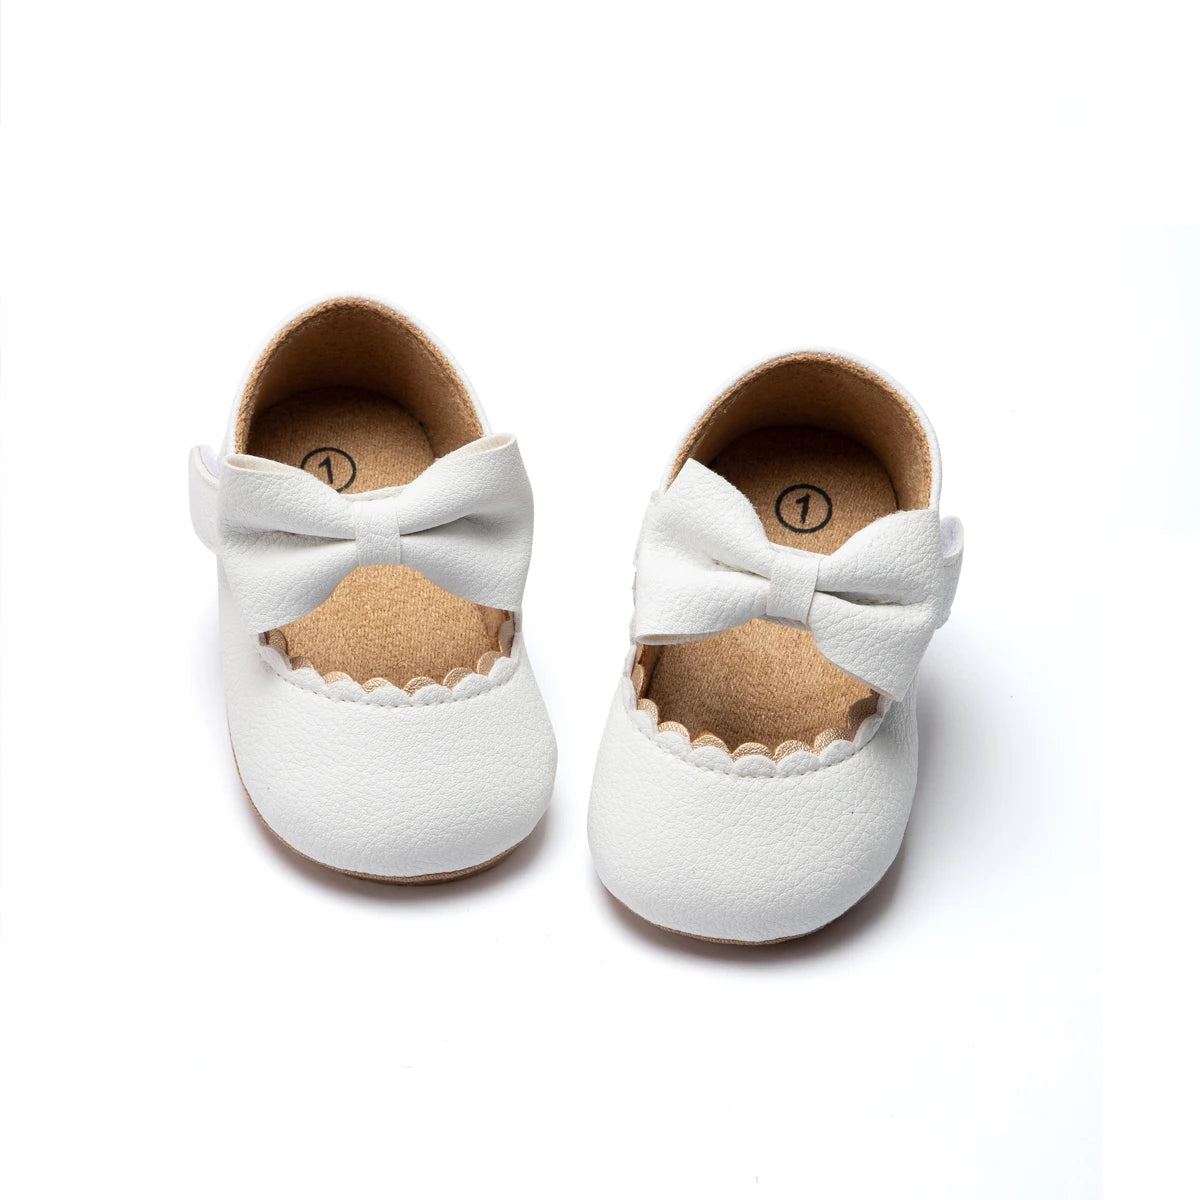 Pram Shoes with Bow